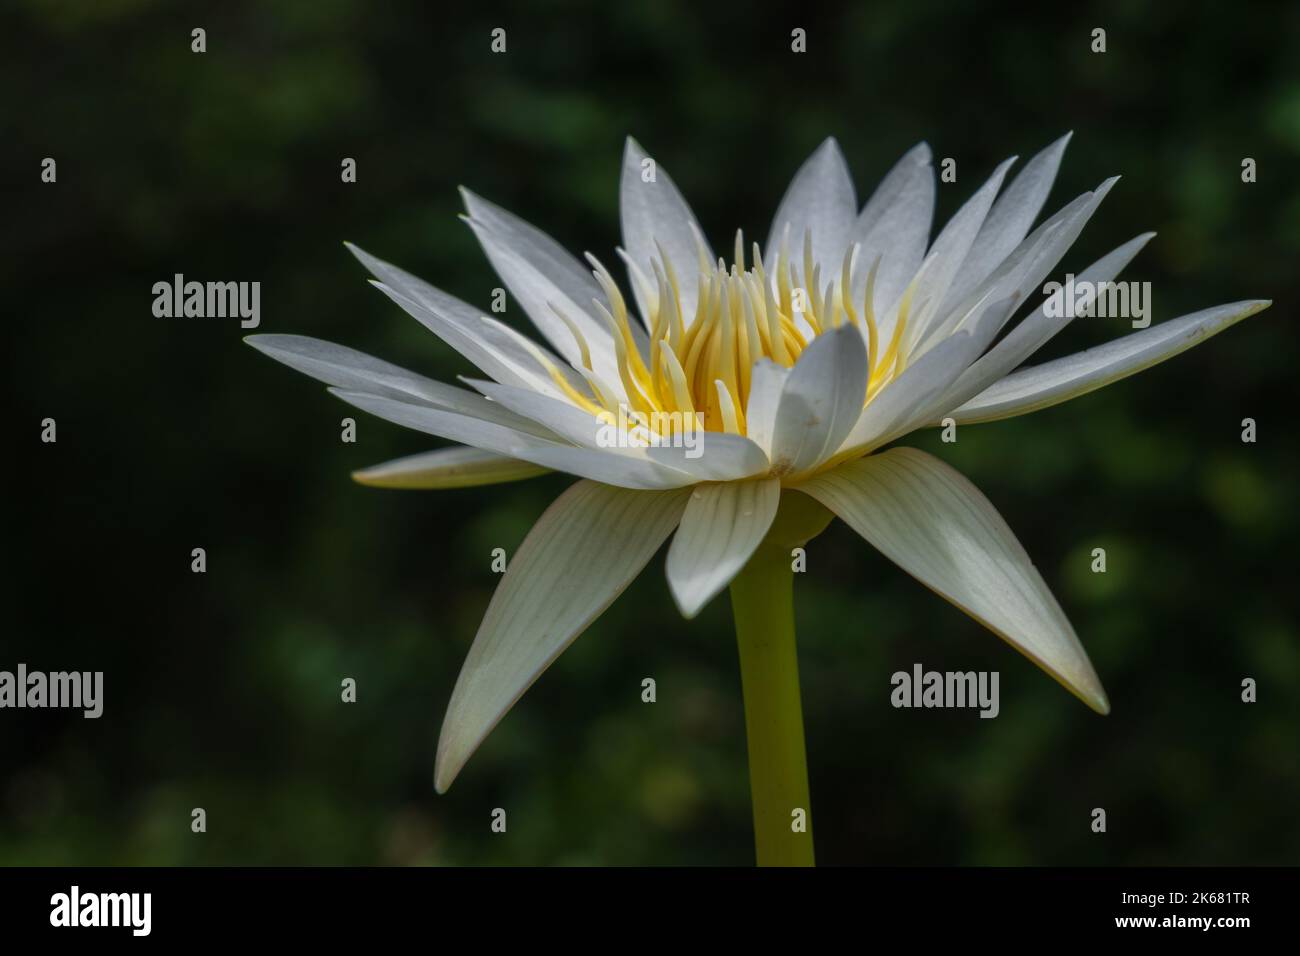 Closeup view of beautiful white and golden yellow tropical water lily flower in full bloom in bright sunlight isolated on natural background Stock Photo